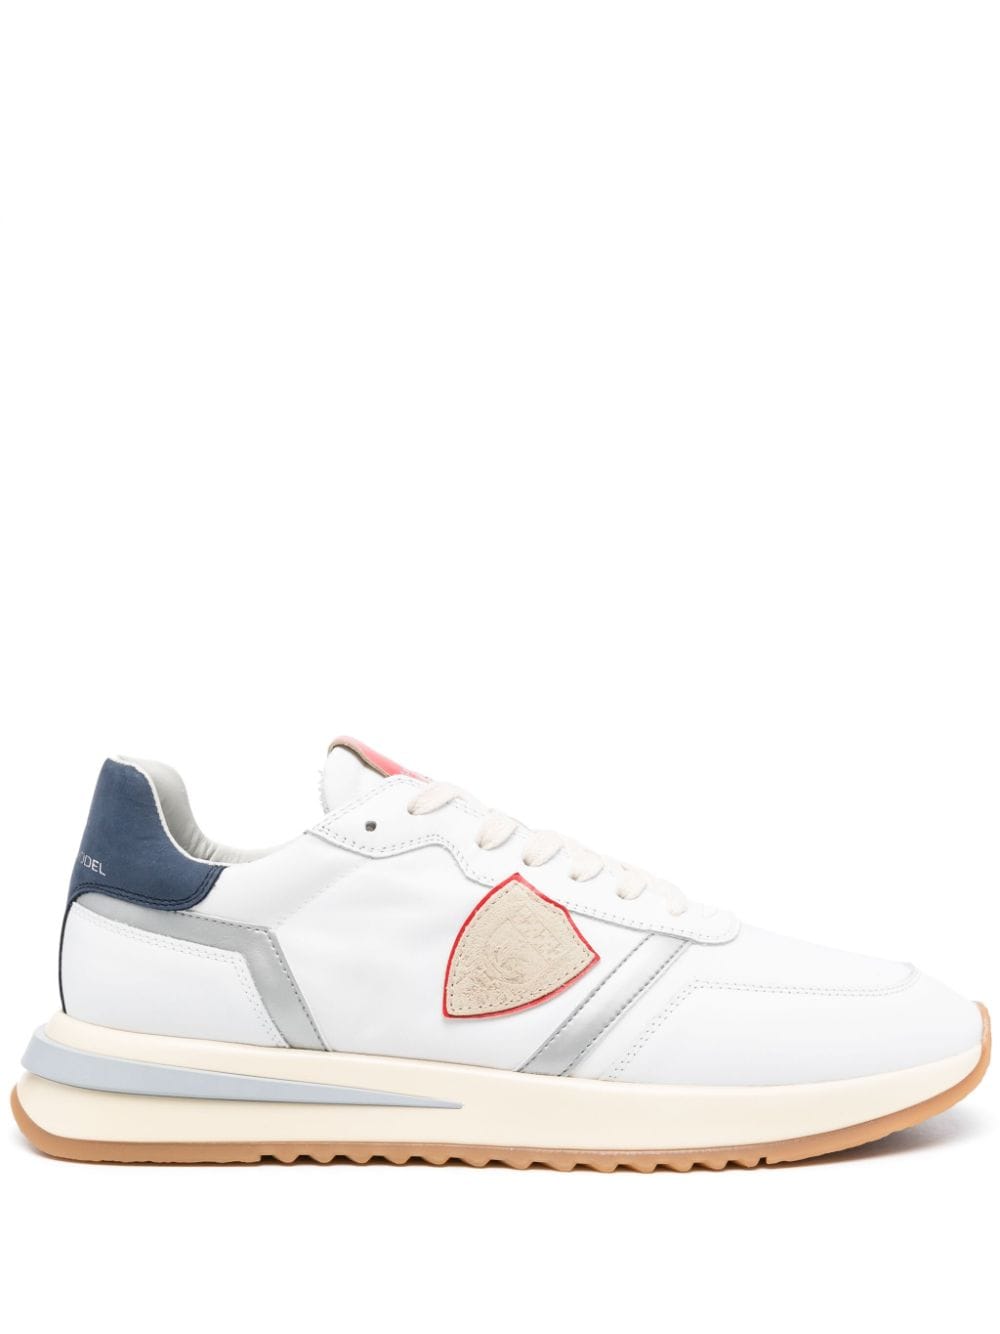 Tropez 2.1 panelled sneakers